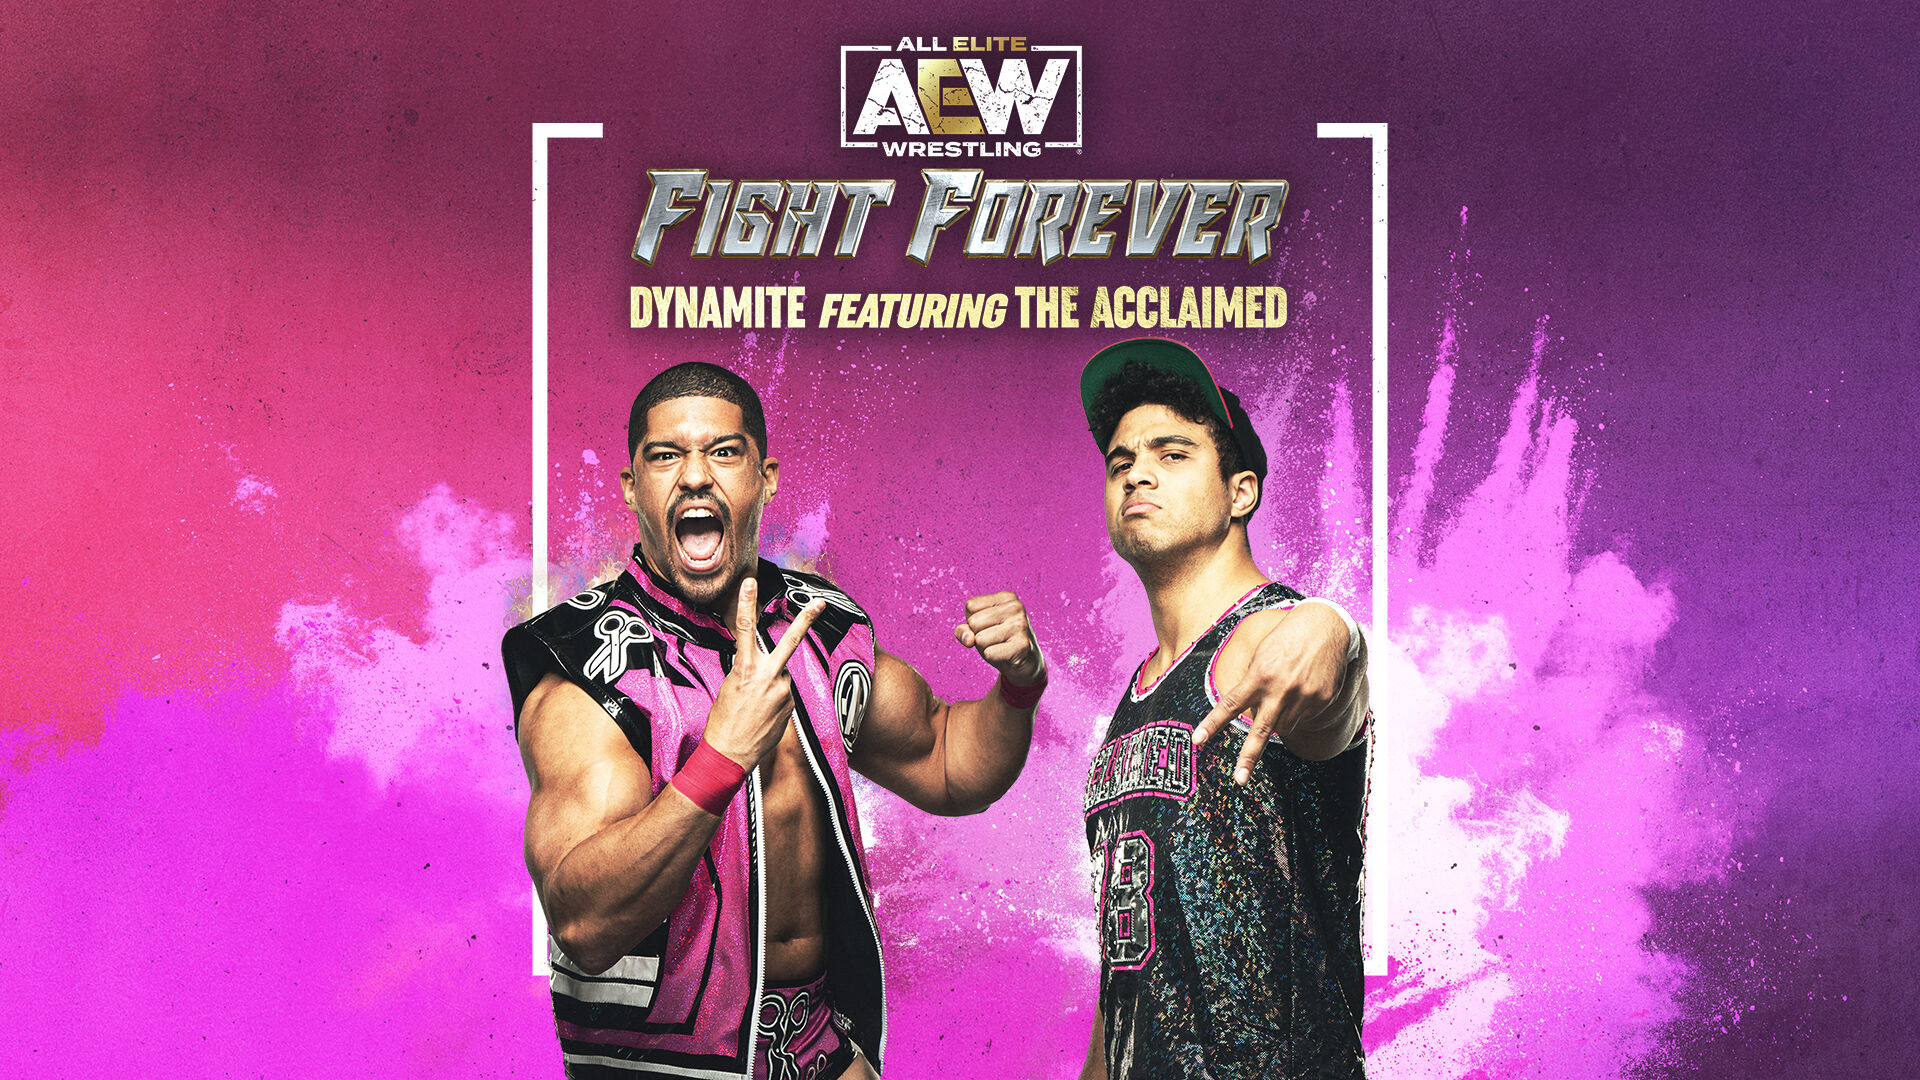 AEW: Fight Forever Dynamite featuring The Acclaimed | My Nintendo 